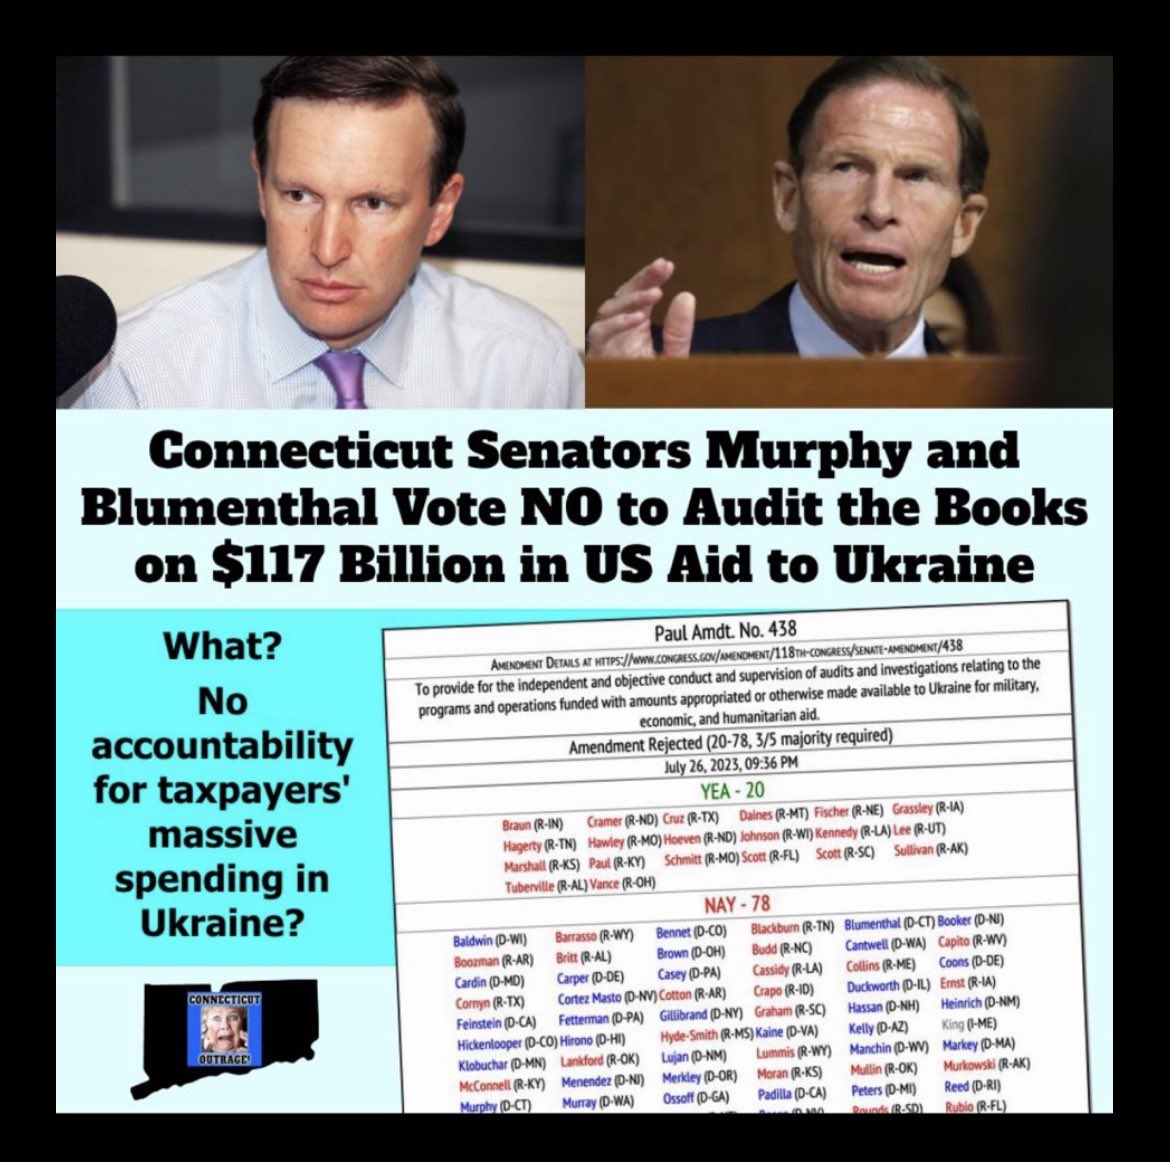 @ChrisMurphyCT @WagnerTonight You should’ve voted for an audit on our tax dollars to Ukraine. You’re all money laundering